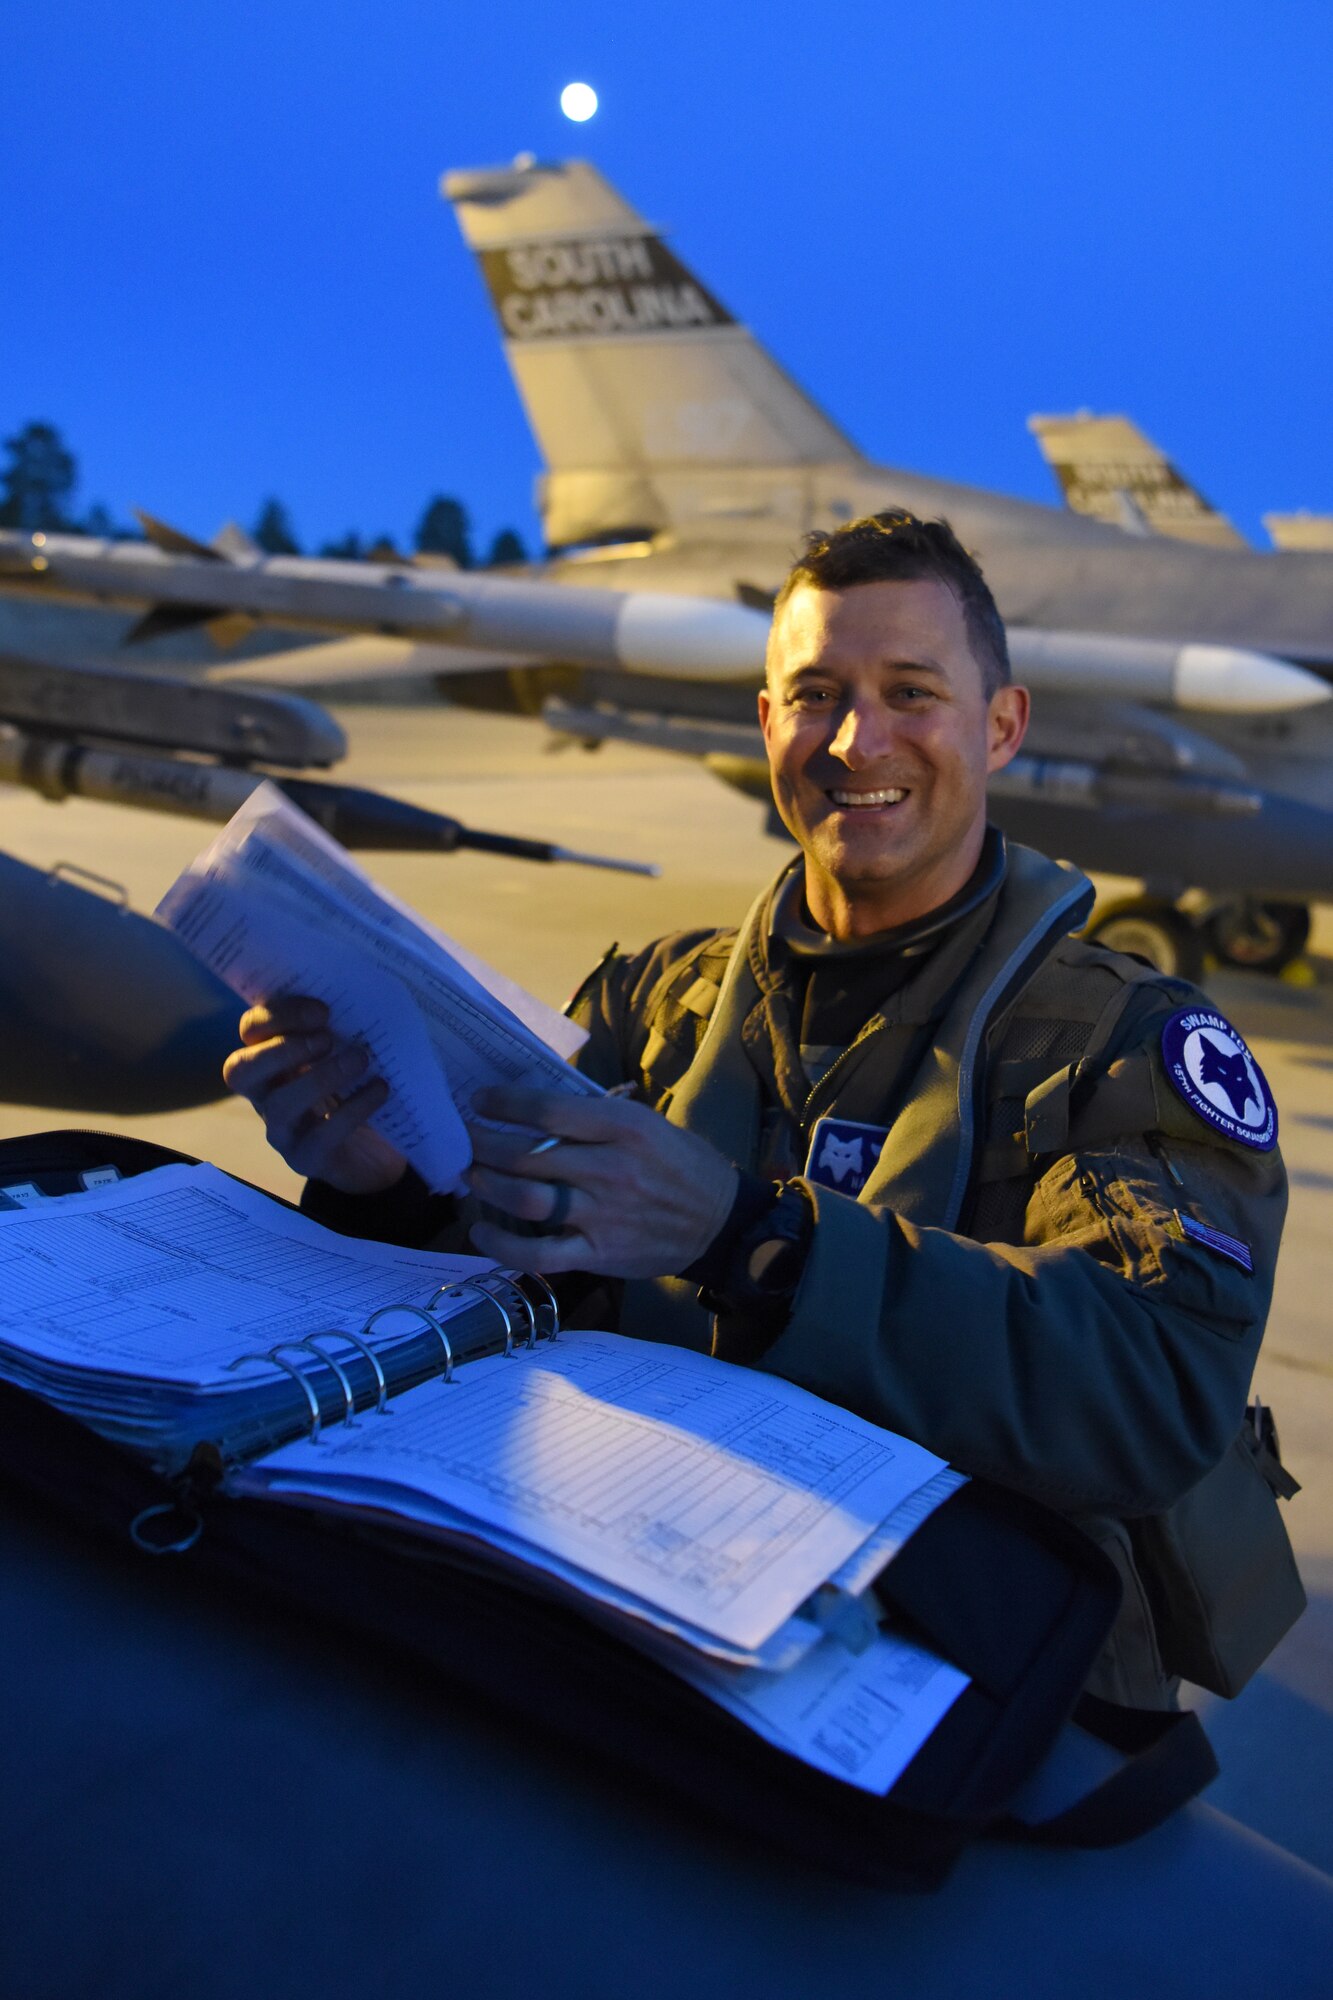 U.S. Air Force Lt. Col. Jeffrey Beckham, an F-16C Block 52 Fighting Falcon pilot assigned to the Air National Guard’s 169th Fighter Wing from McEntire Joint National Guard Base, S.C., completes aircraft status records after arriving at Kallax Air Base, Luleå, Sweden, May 16, 2019 in preparation for Arctic Challenge Exercise 2019. U.S. Air Force F-16C Block 52 Fighting Falcons arrive to participate in ACE 19. ACE19 is a Nordic aviation exercise, and this year will include participation from the Swedish, Norwegian, Danish, Finnish, French, German, Dutch, British, and U.S. forces. U.S. force’s participation, as part of the European Deterrence Initiative, demonstrates steadfast commitment to NATO allies and partners in Europe to remain resolute regional stability and security. (U.S. Air National Guard photo by Senior Master Sgt. Edward Snyder)